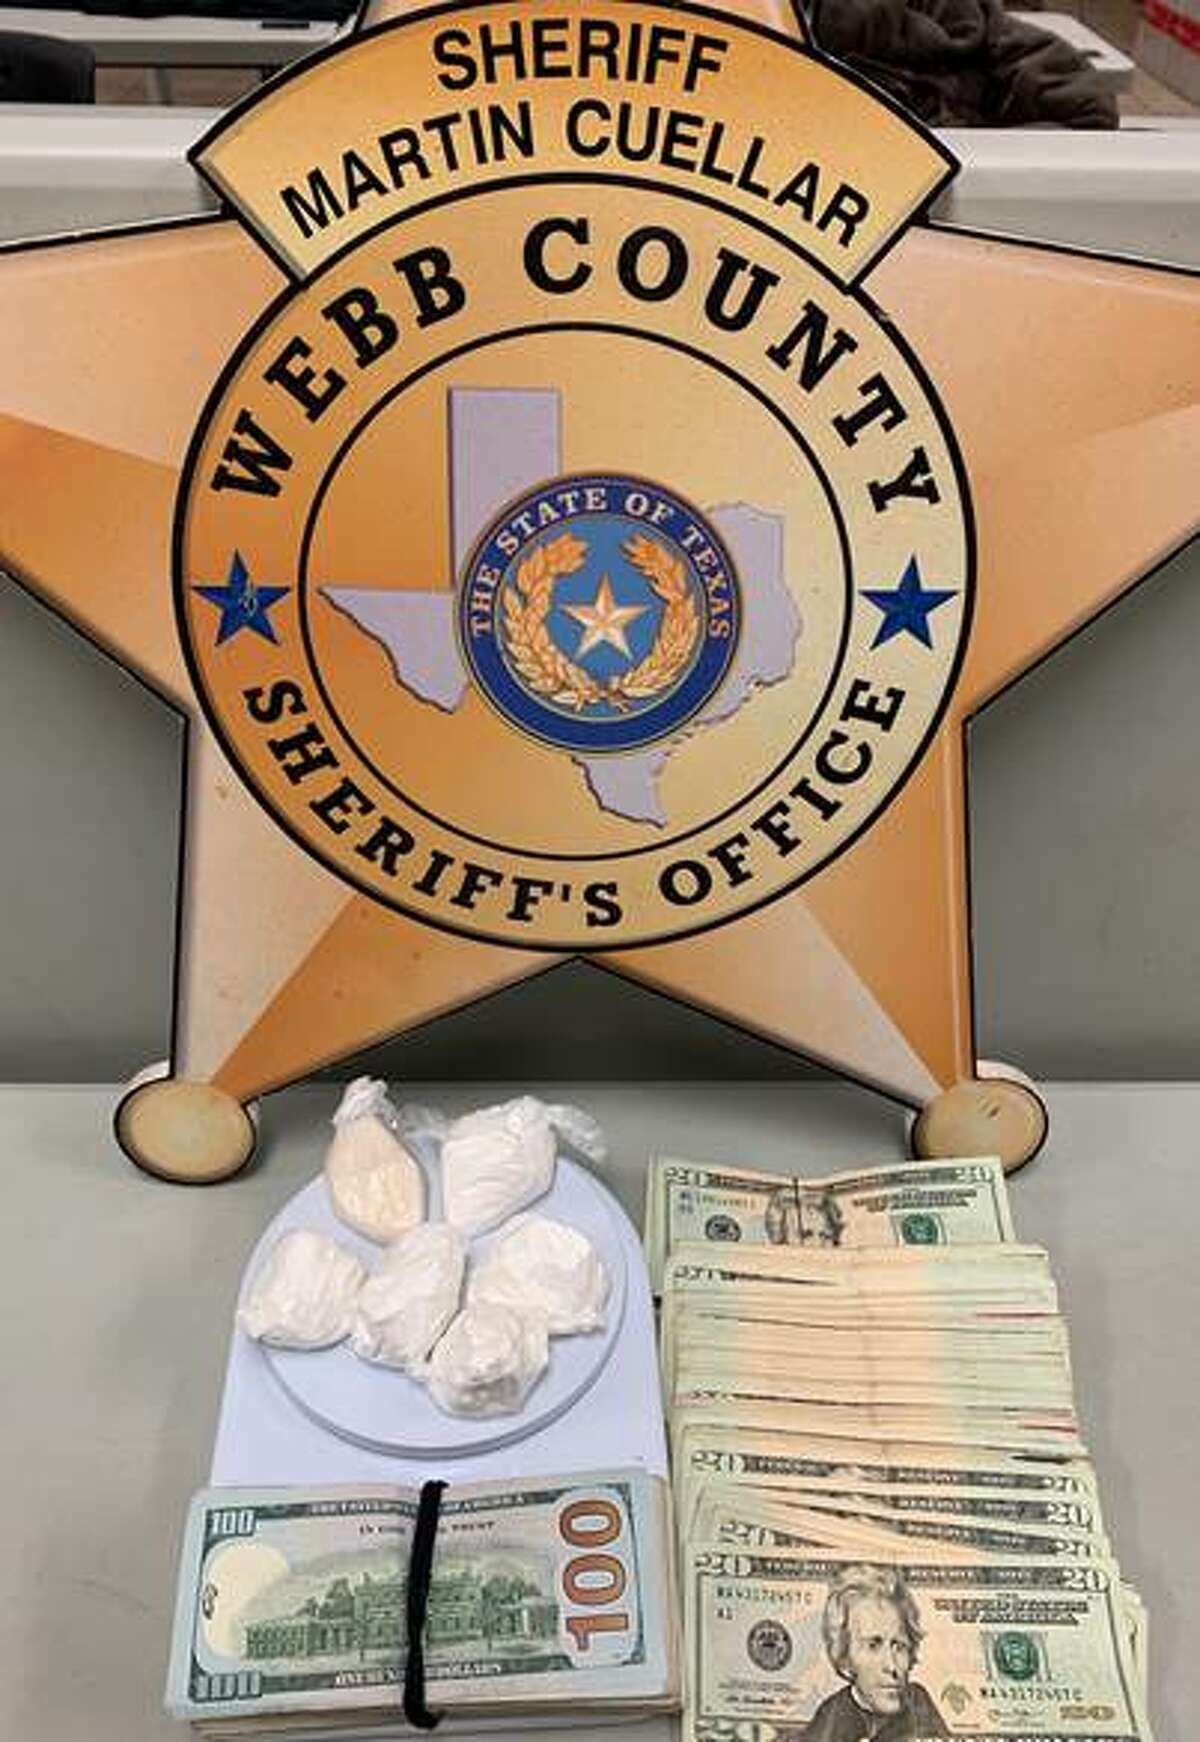 Shown are the 5.4 ounces of cocaine and $2,474 seized Friday from a residence in the 1300 block of Rosario Street.